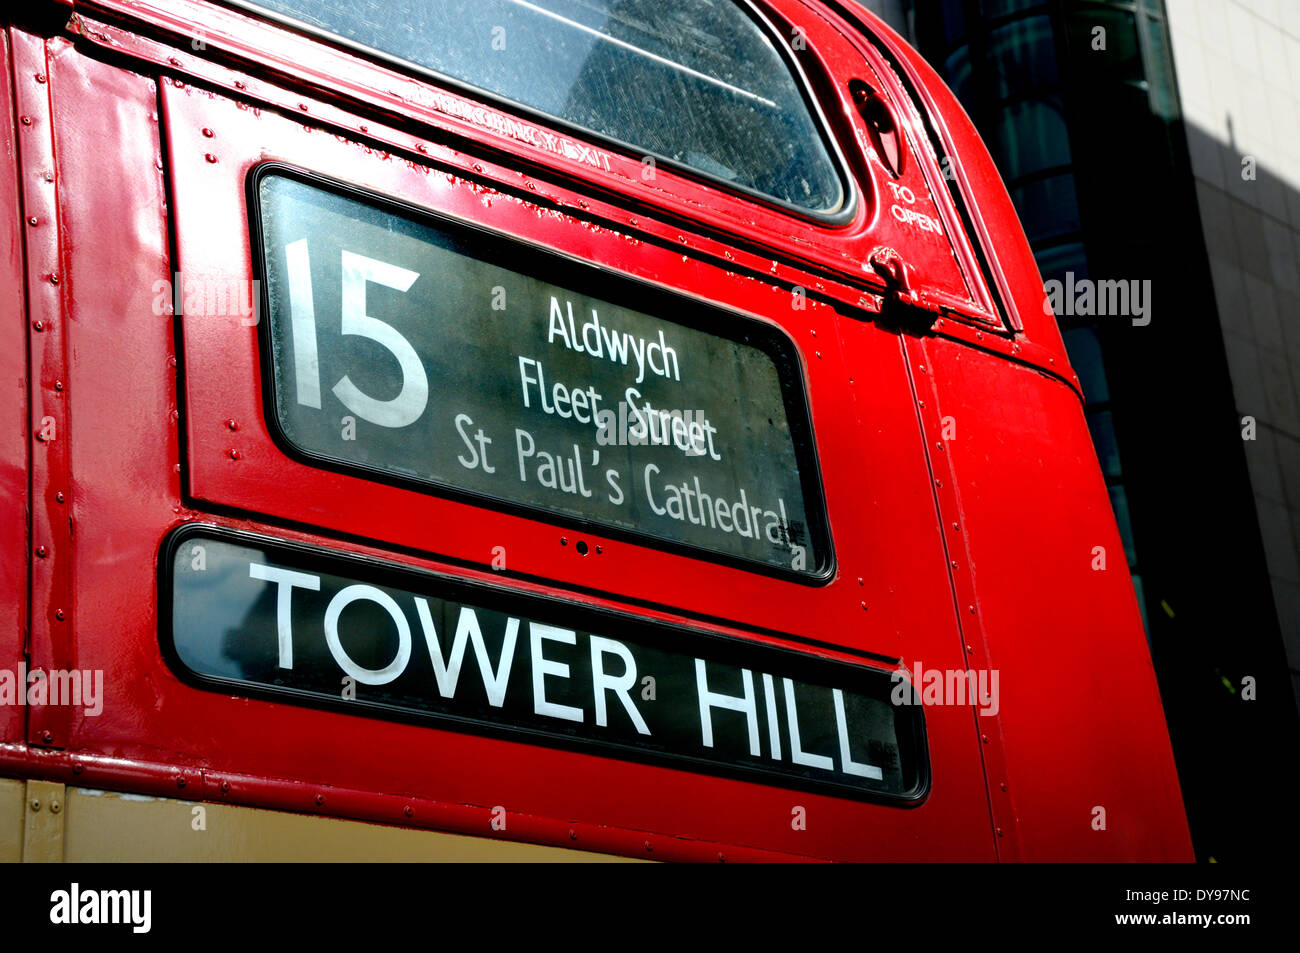 London, England, UK. No. 15 Double decker bus to Tower Hill Stock Photo